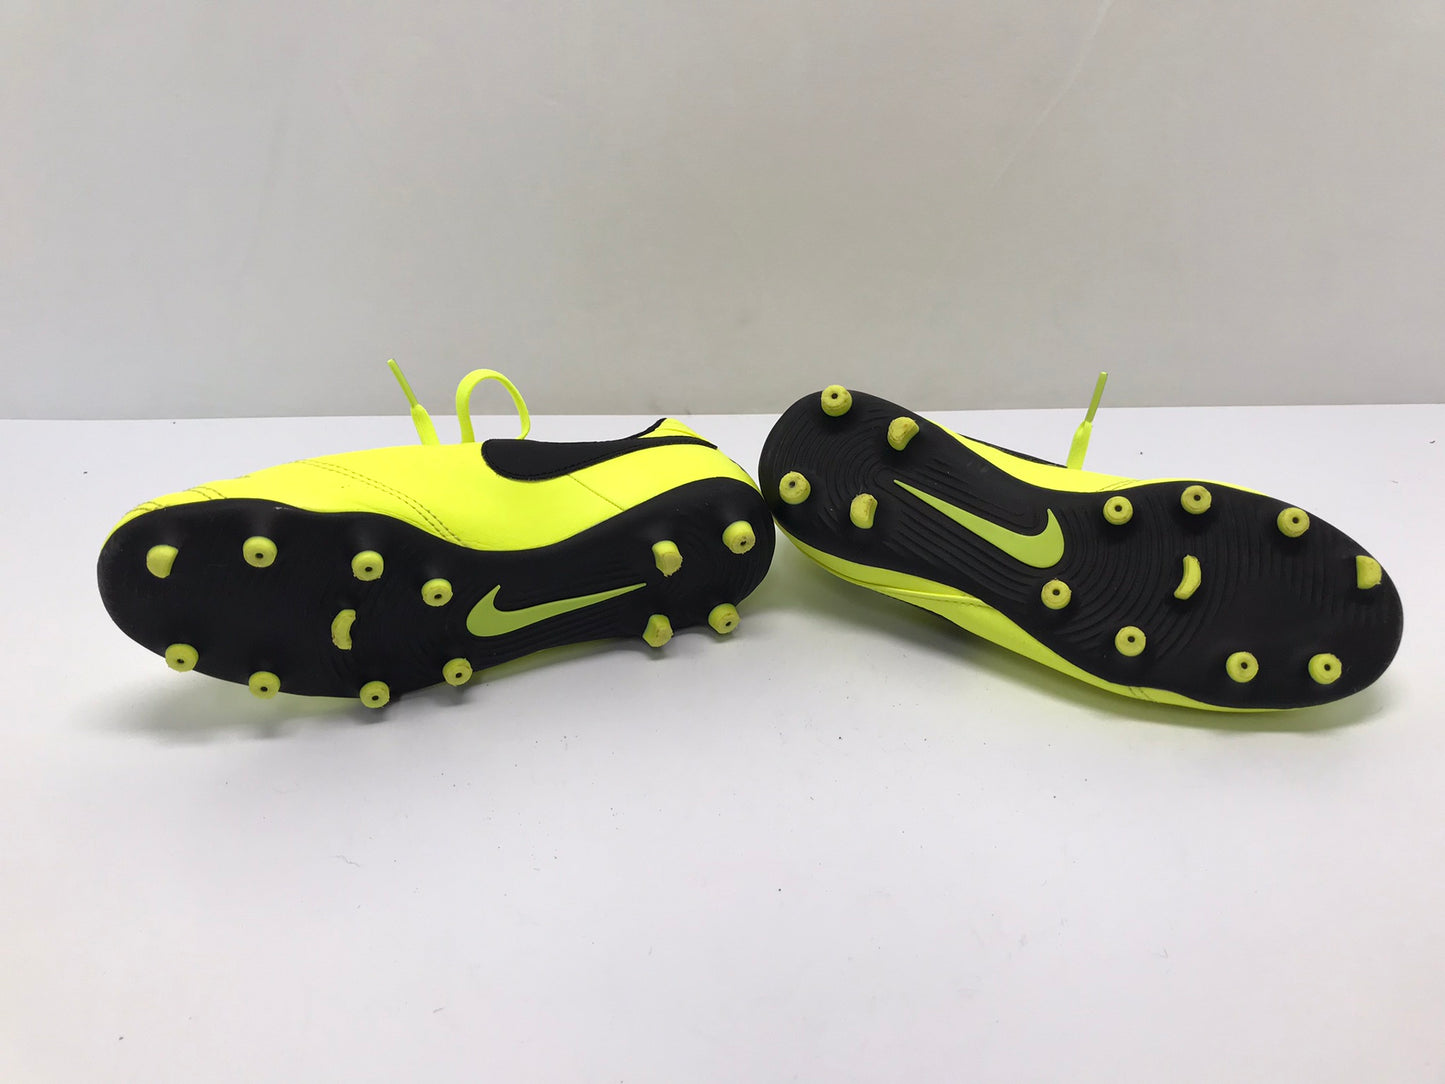 Soccer Shoes Cleats Child Size 4.5 Nike Tiempo Lime Black New Demo Model